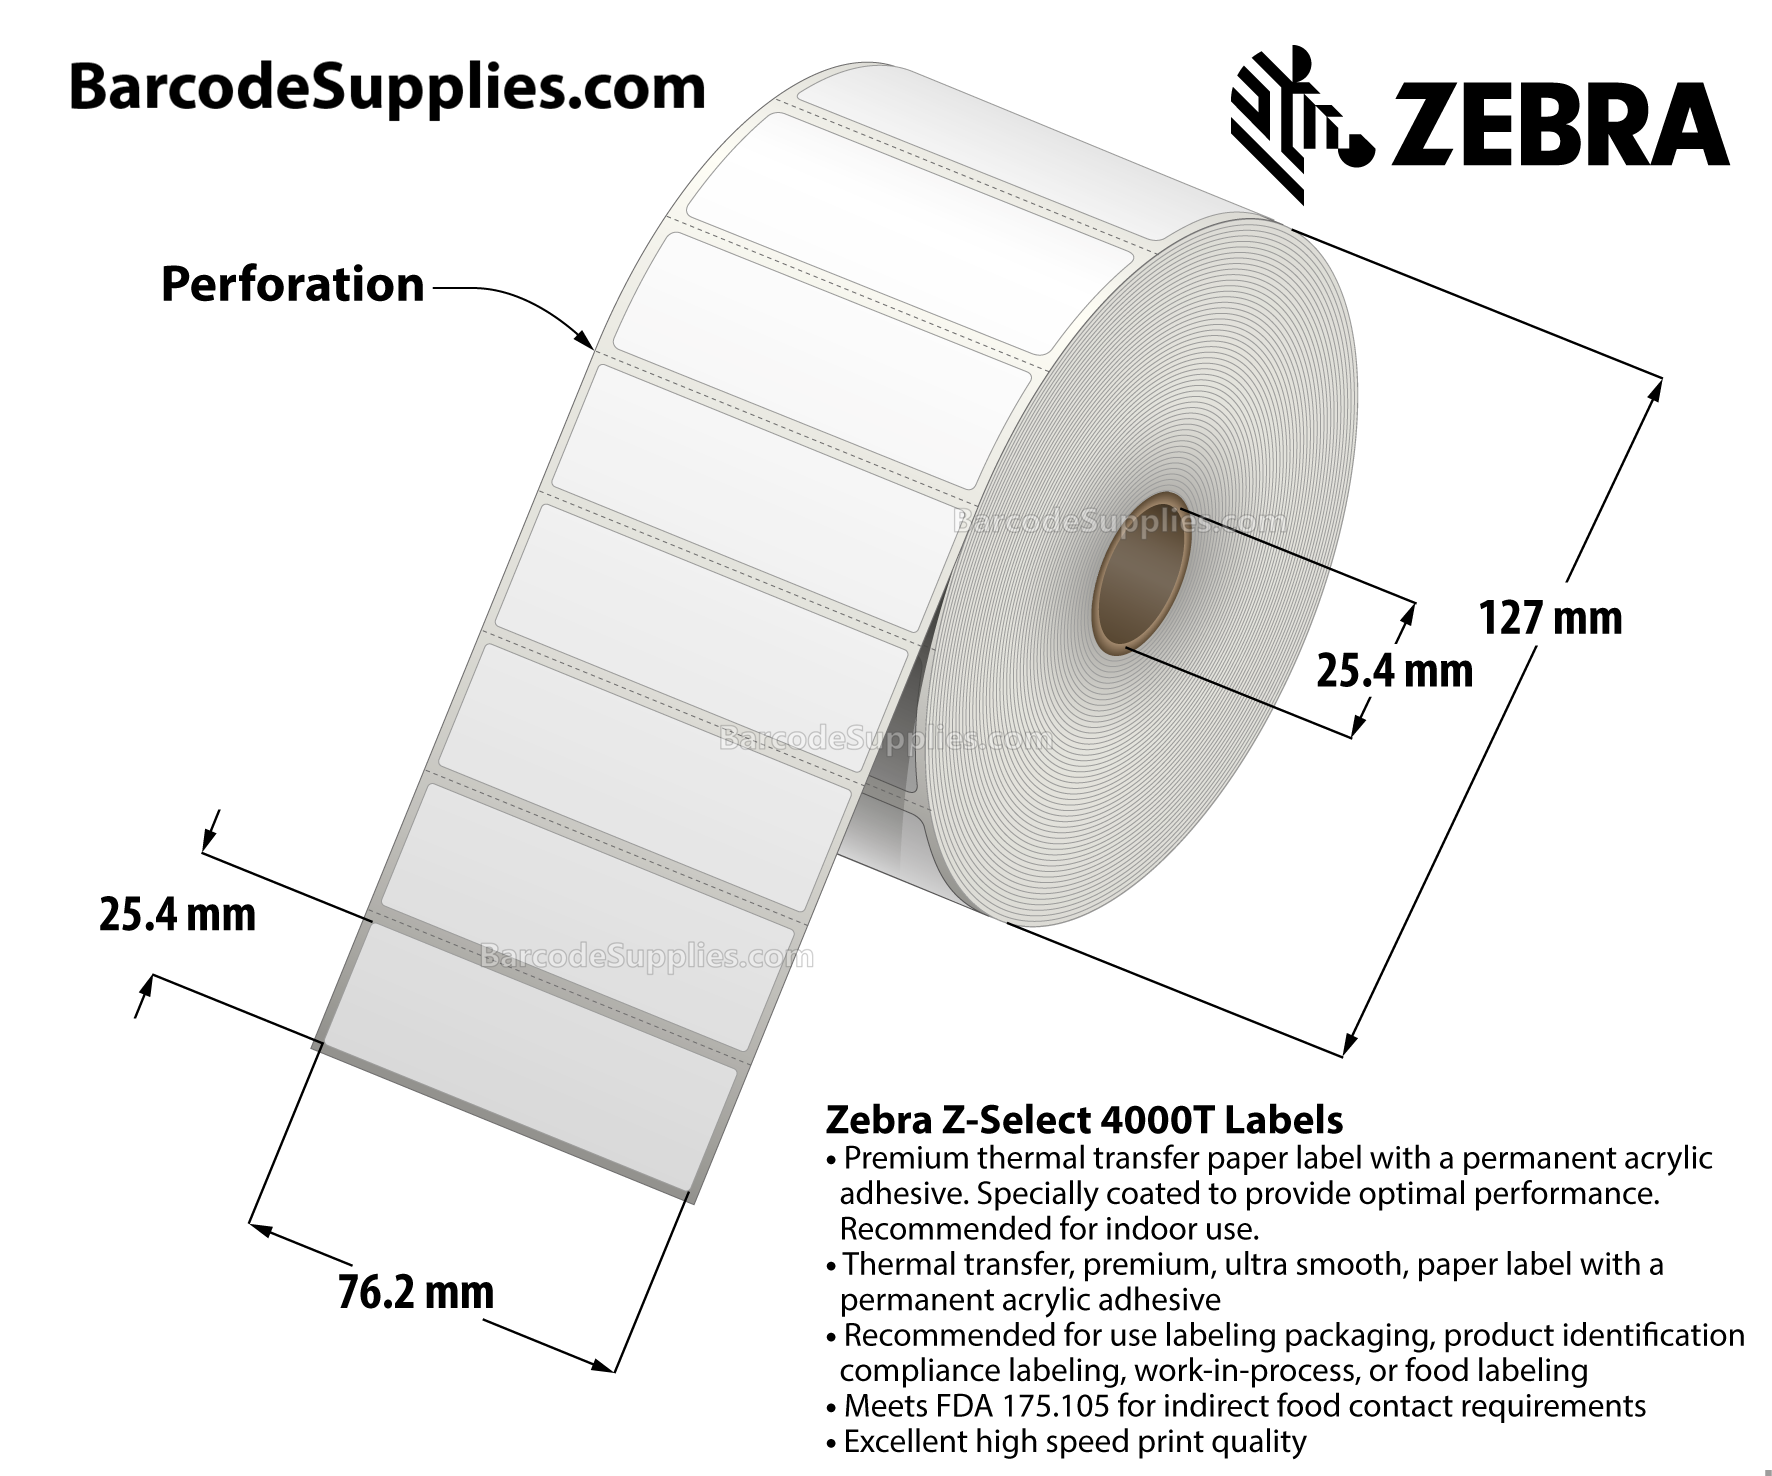 3 x 1 Thermal Transfer White Z-Select 4000T Labels With Permanent Adhesive - Perforated - 2580 Labels Per Roll - Carton Of 6 Rolls - 15480 Labels Total - MPN: 10009528